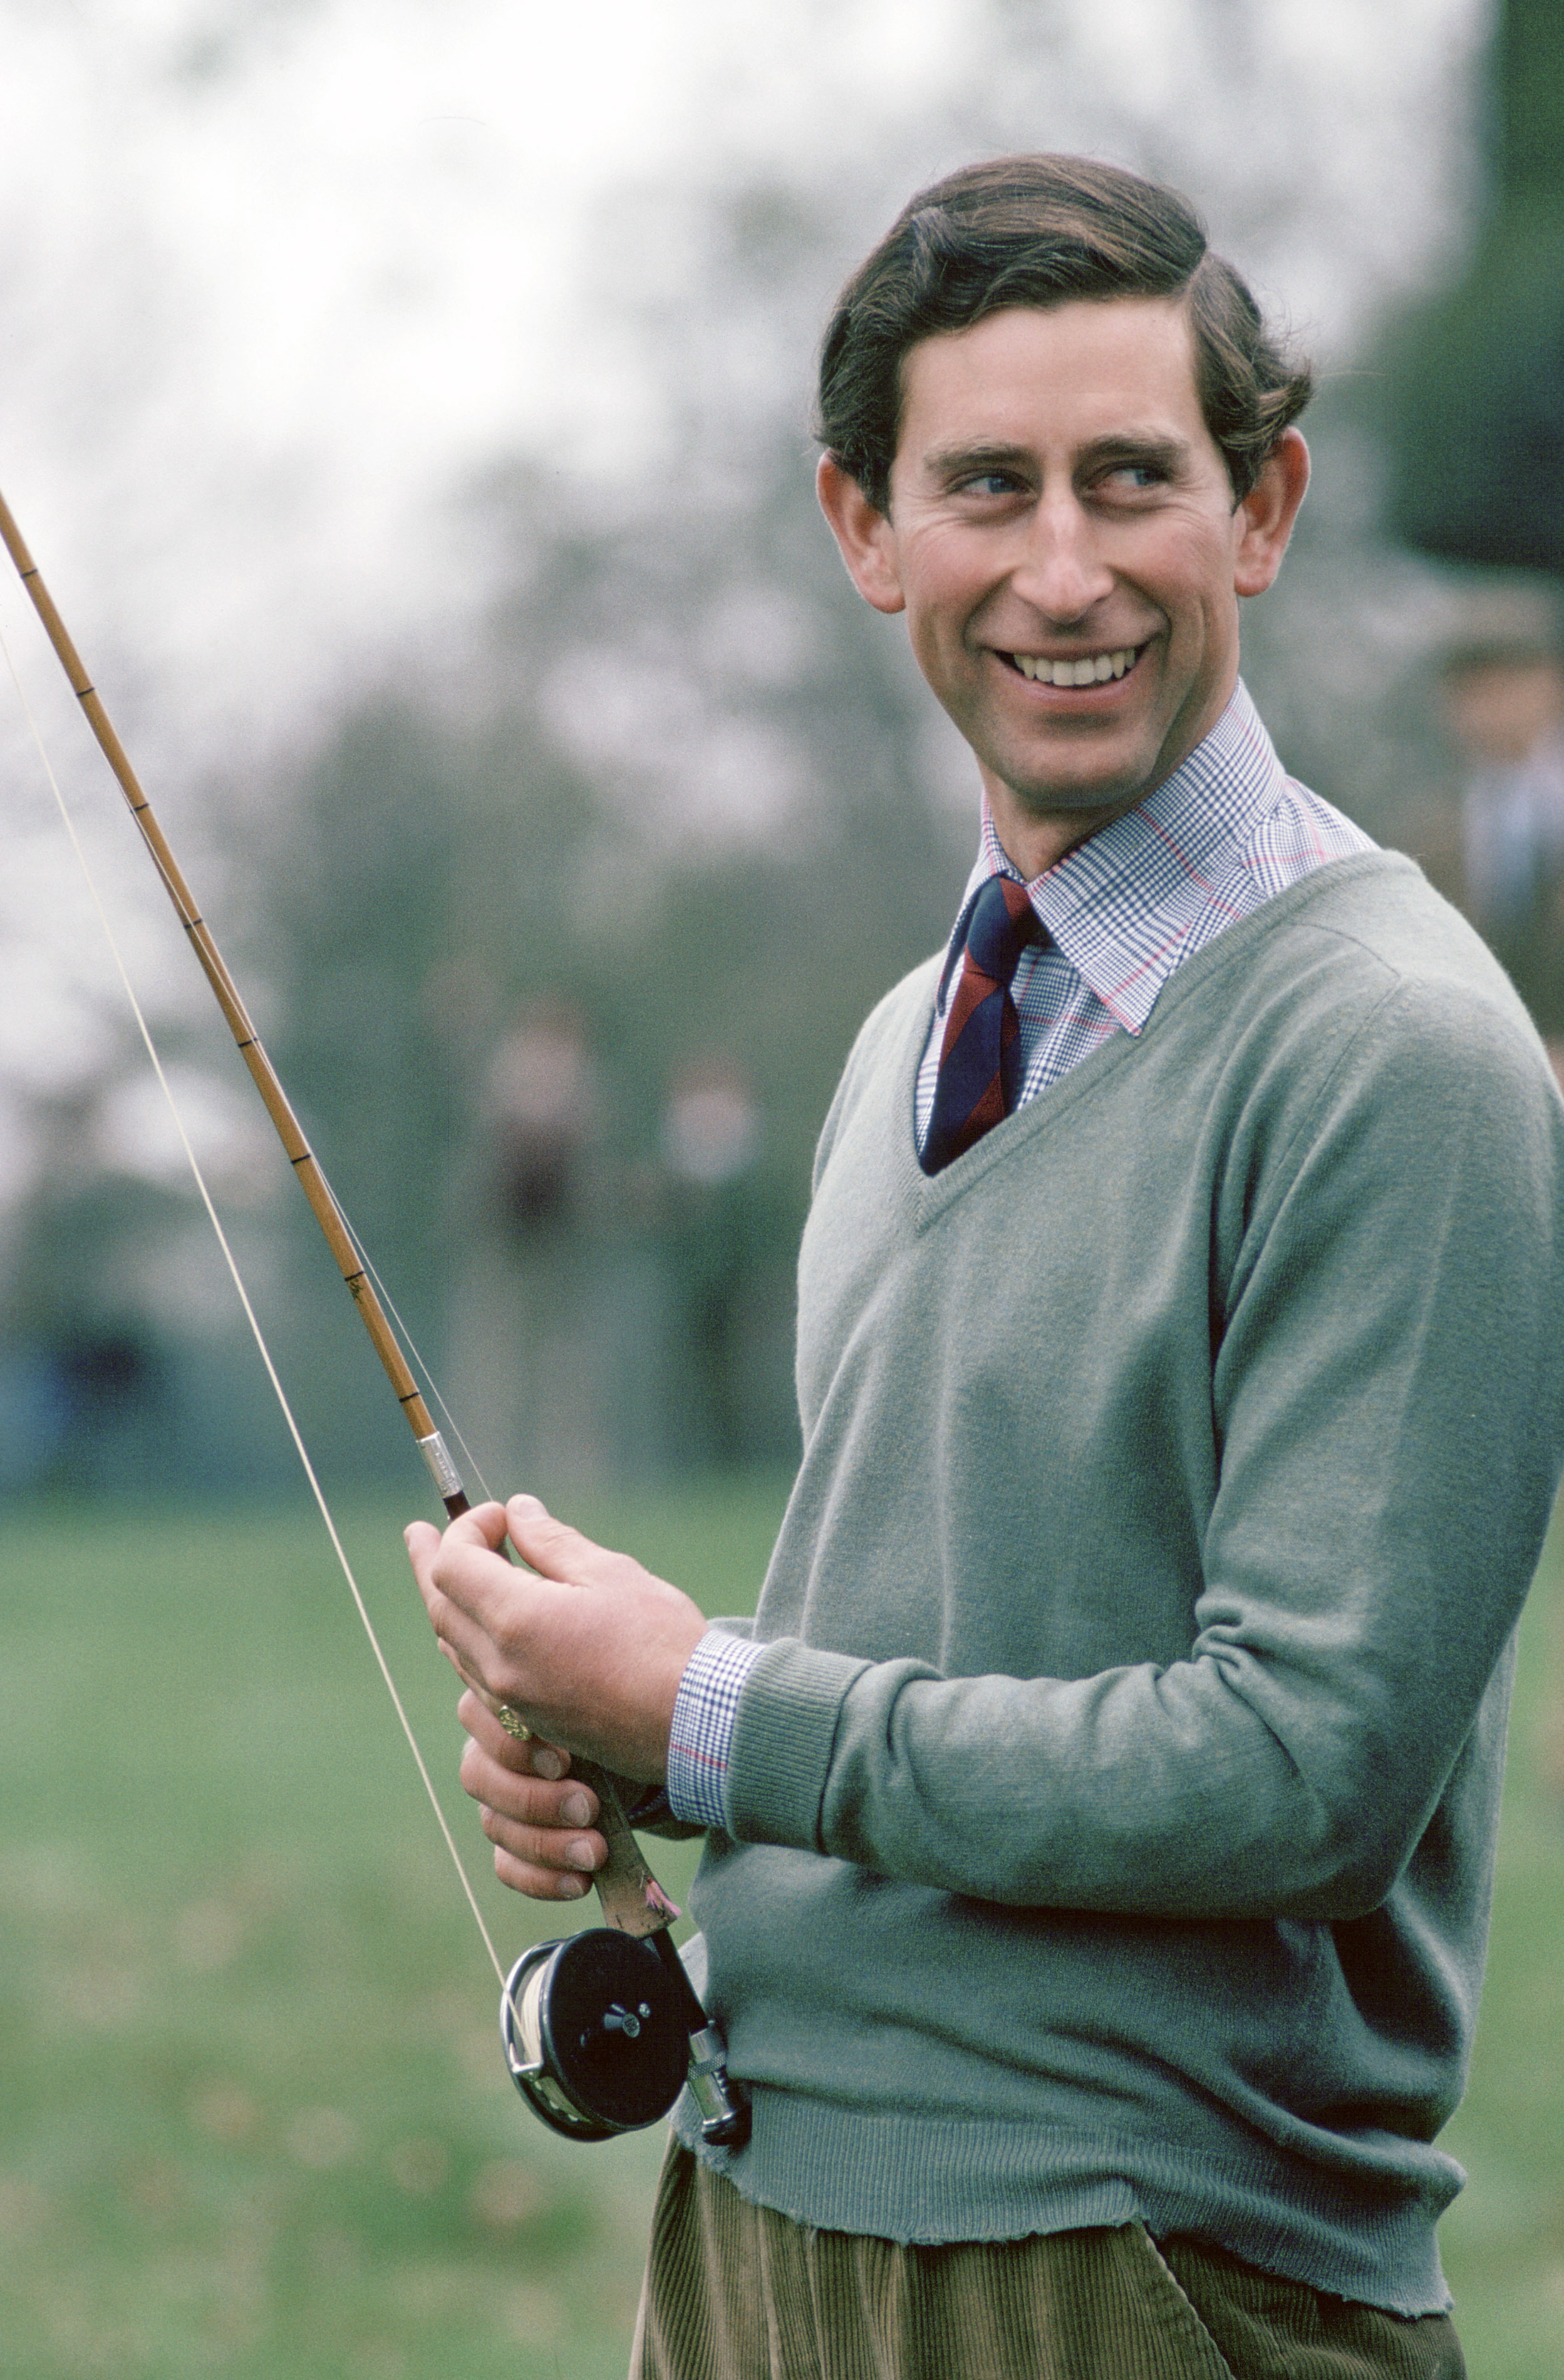 Prince Charles with a fishing rod, photographed on May 12, 1979 in the United Kingdom | Source:Getty Images